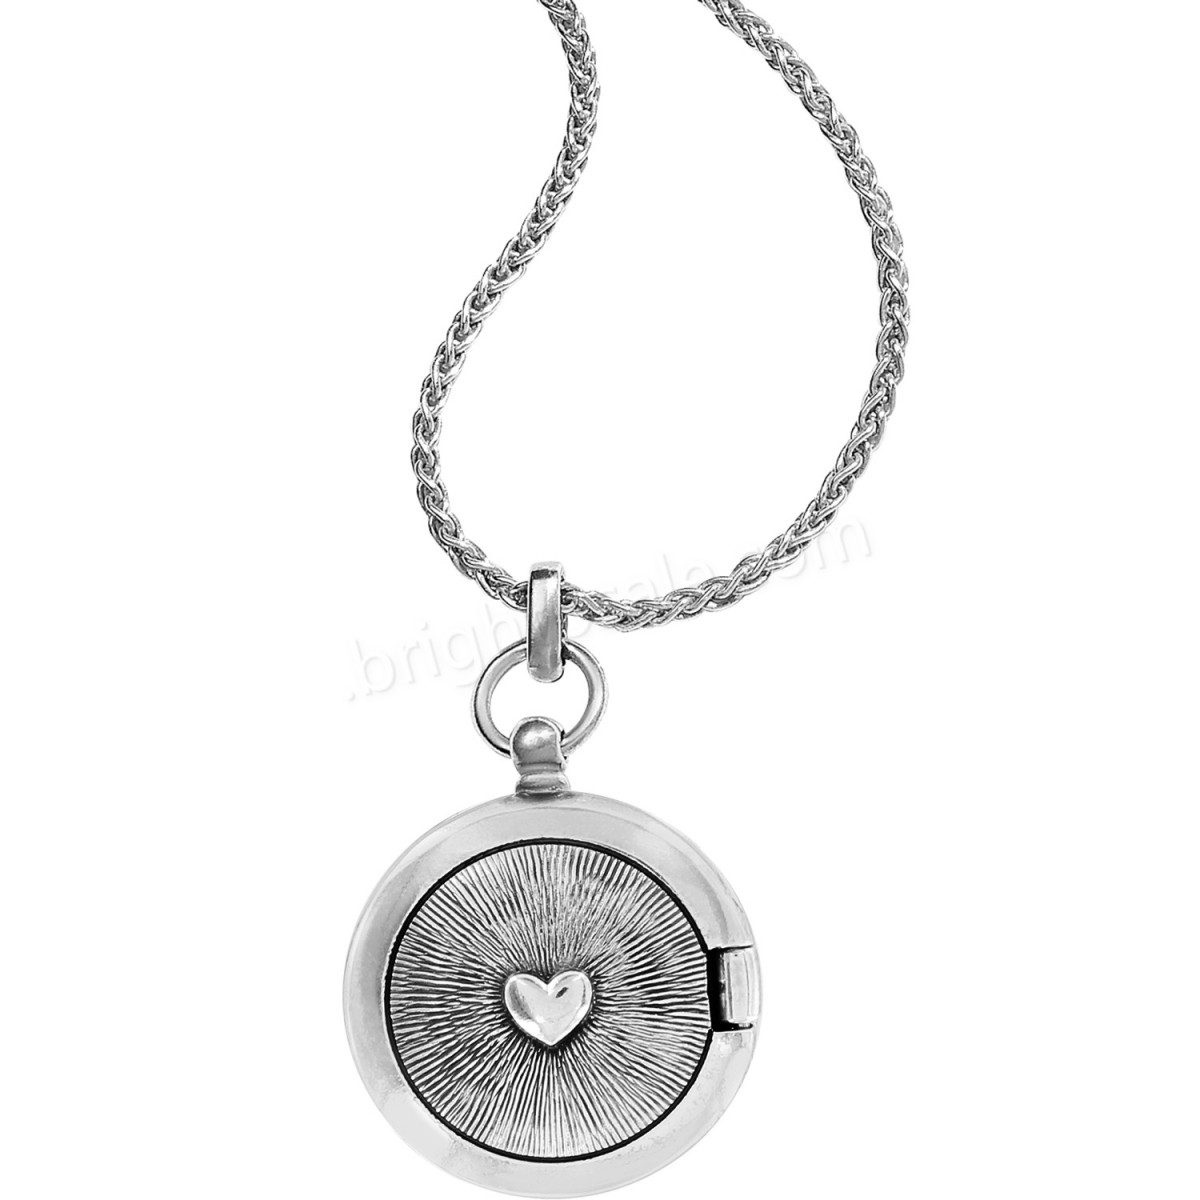 Brighton Collectibles & Online Discount Neptune's Rings Golden Heart Necklace - -2